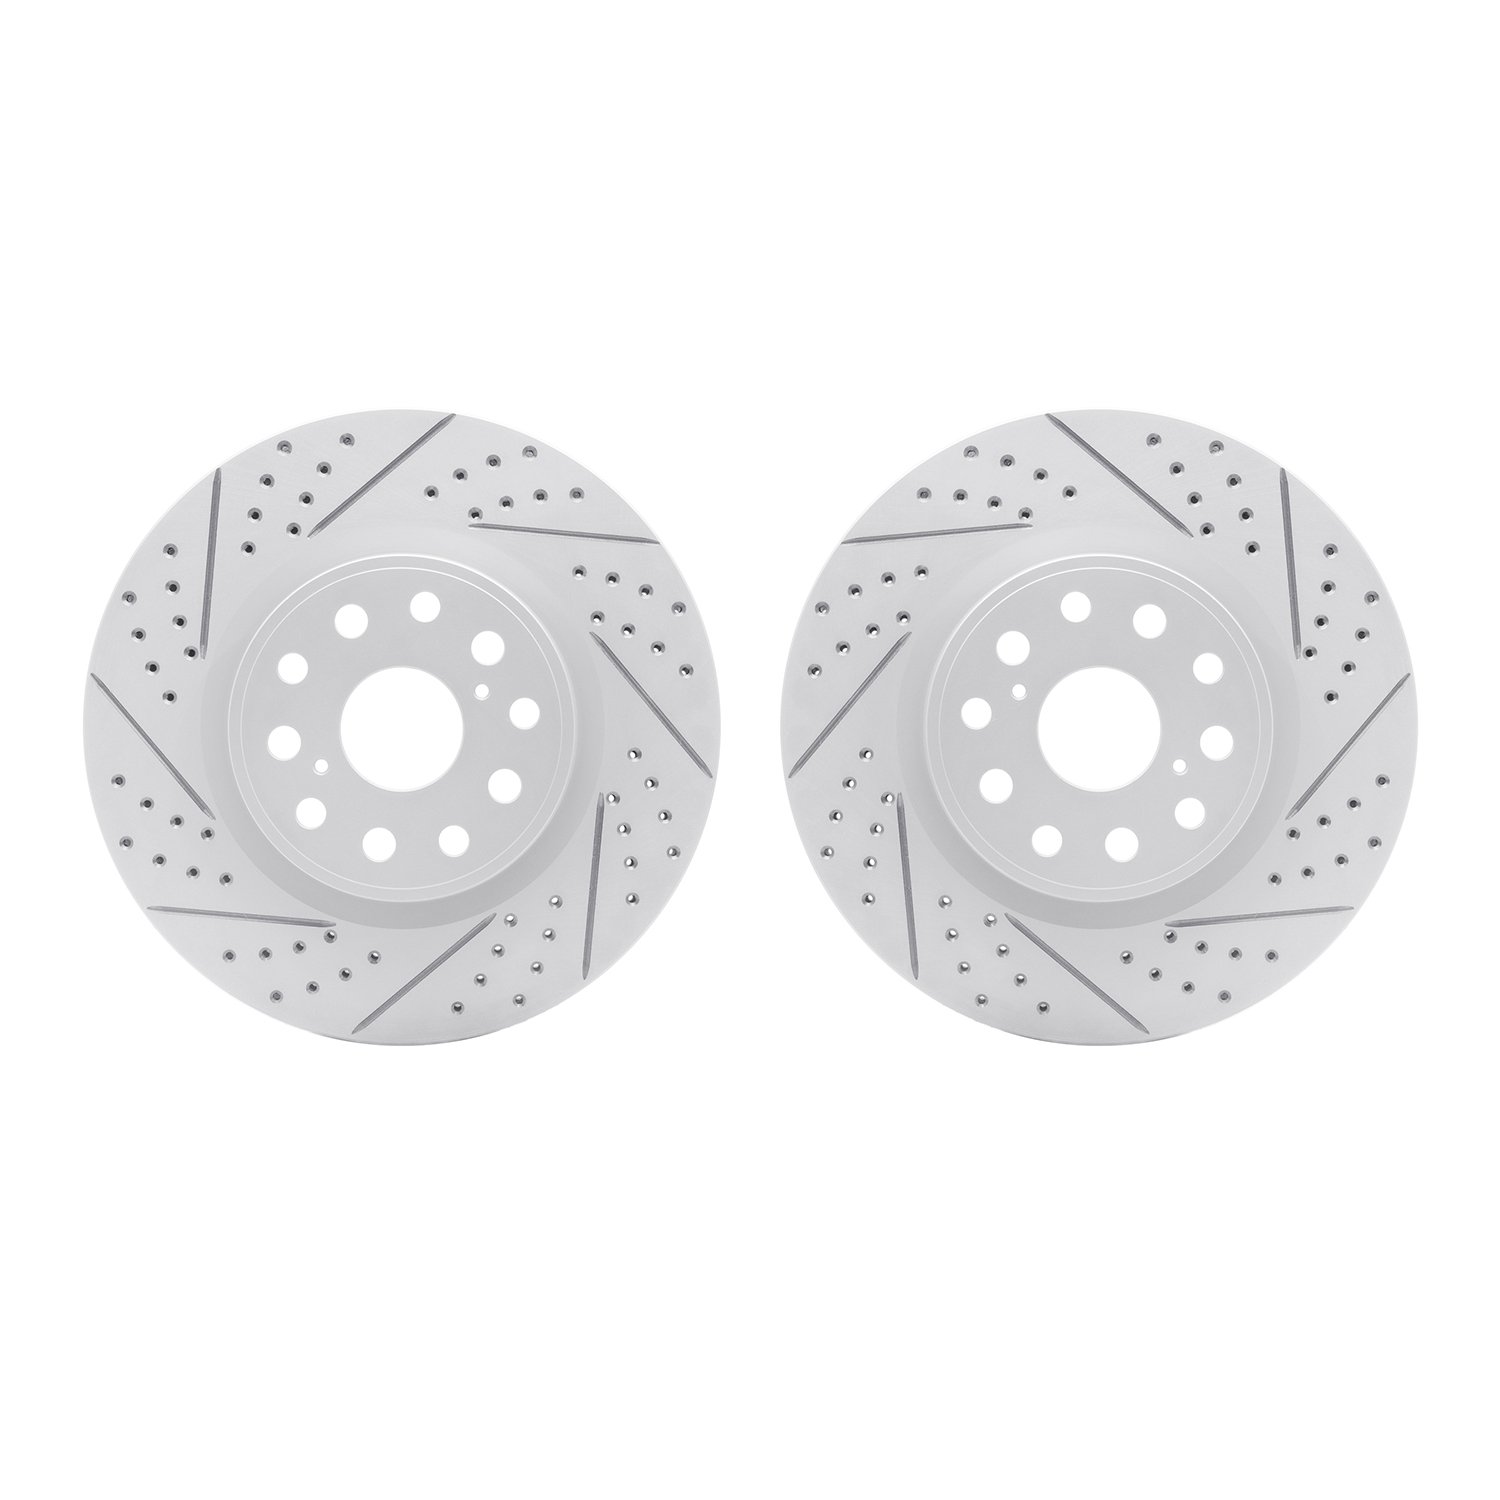 2002-75012 Geoperformance Drilled/Slotted Brake Rotors, Fits Select Lexus/Toyota/Scion, Position: Front